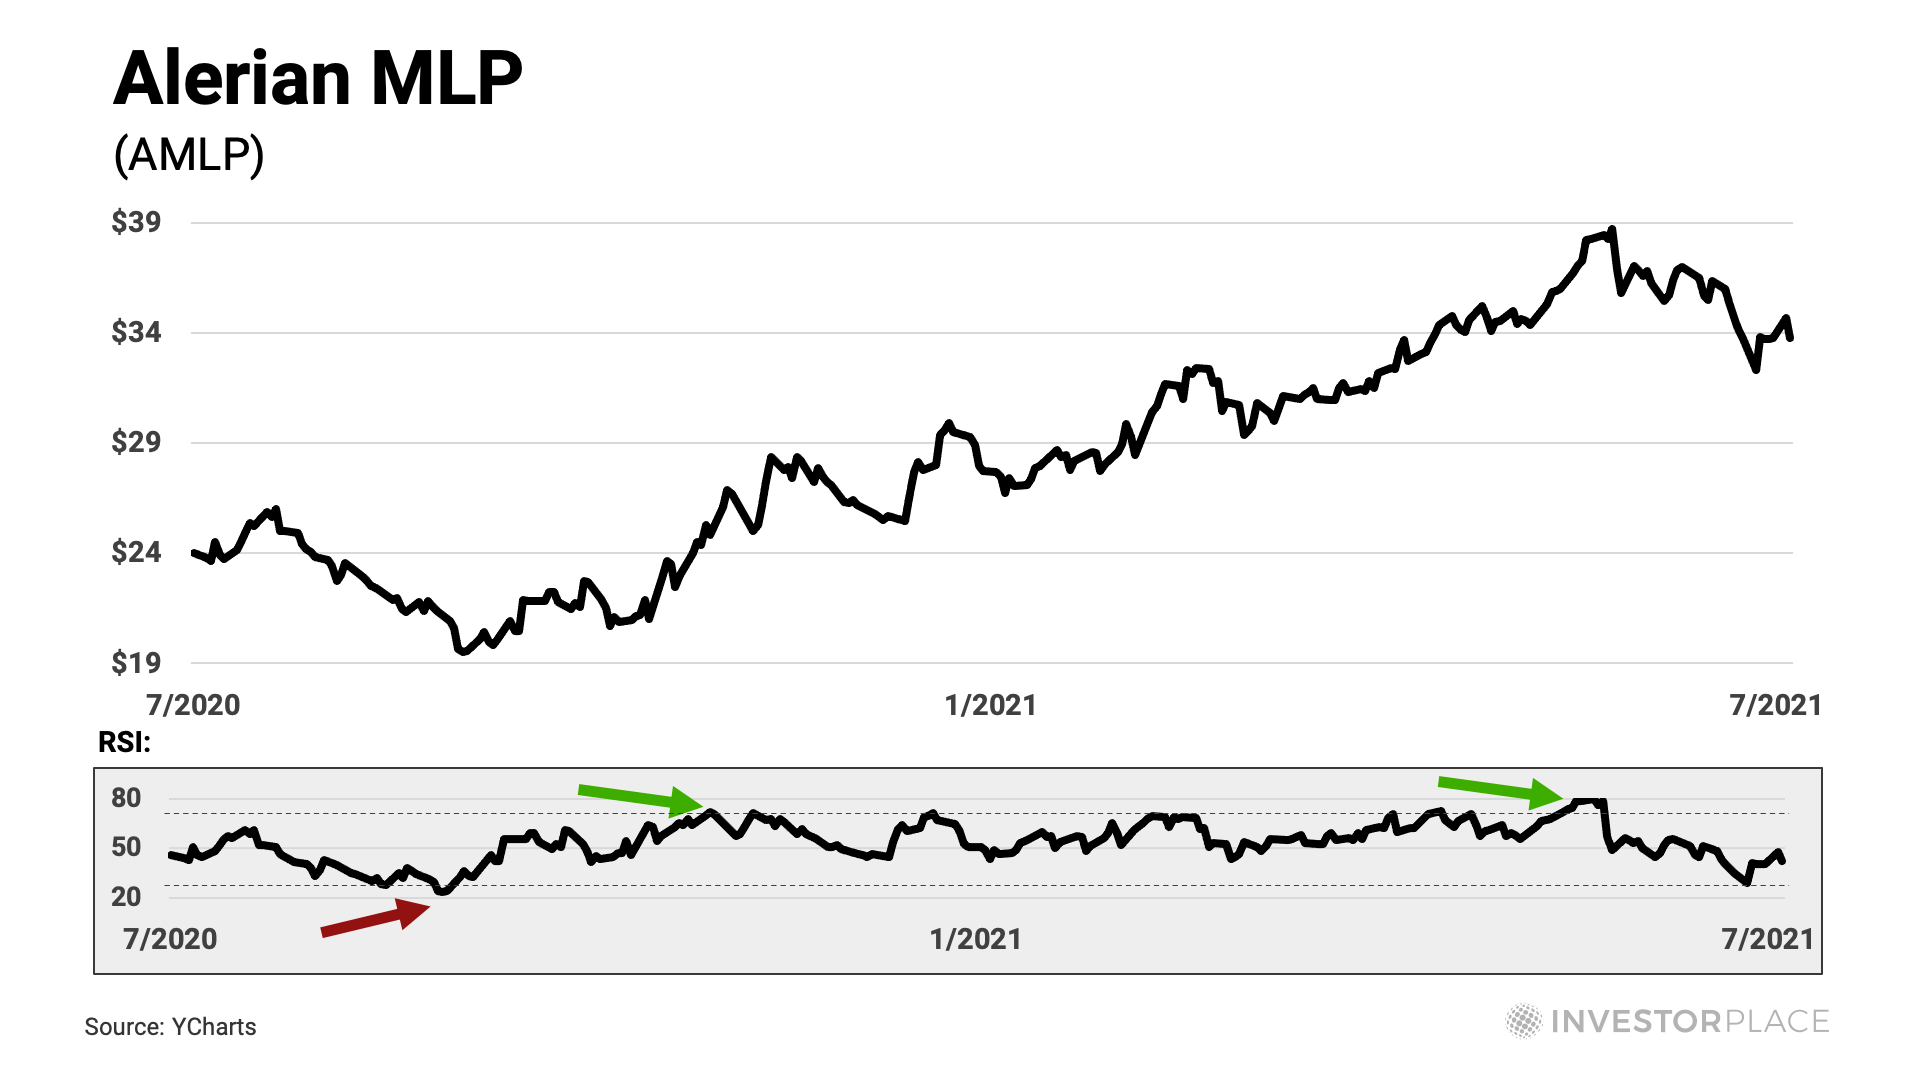 Chart of AMLP from July 2020 to July 2021